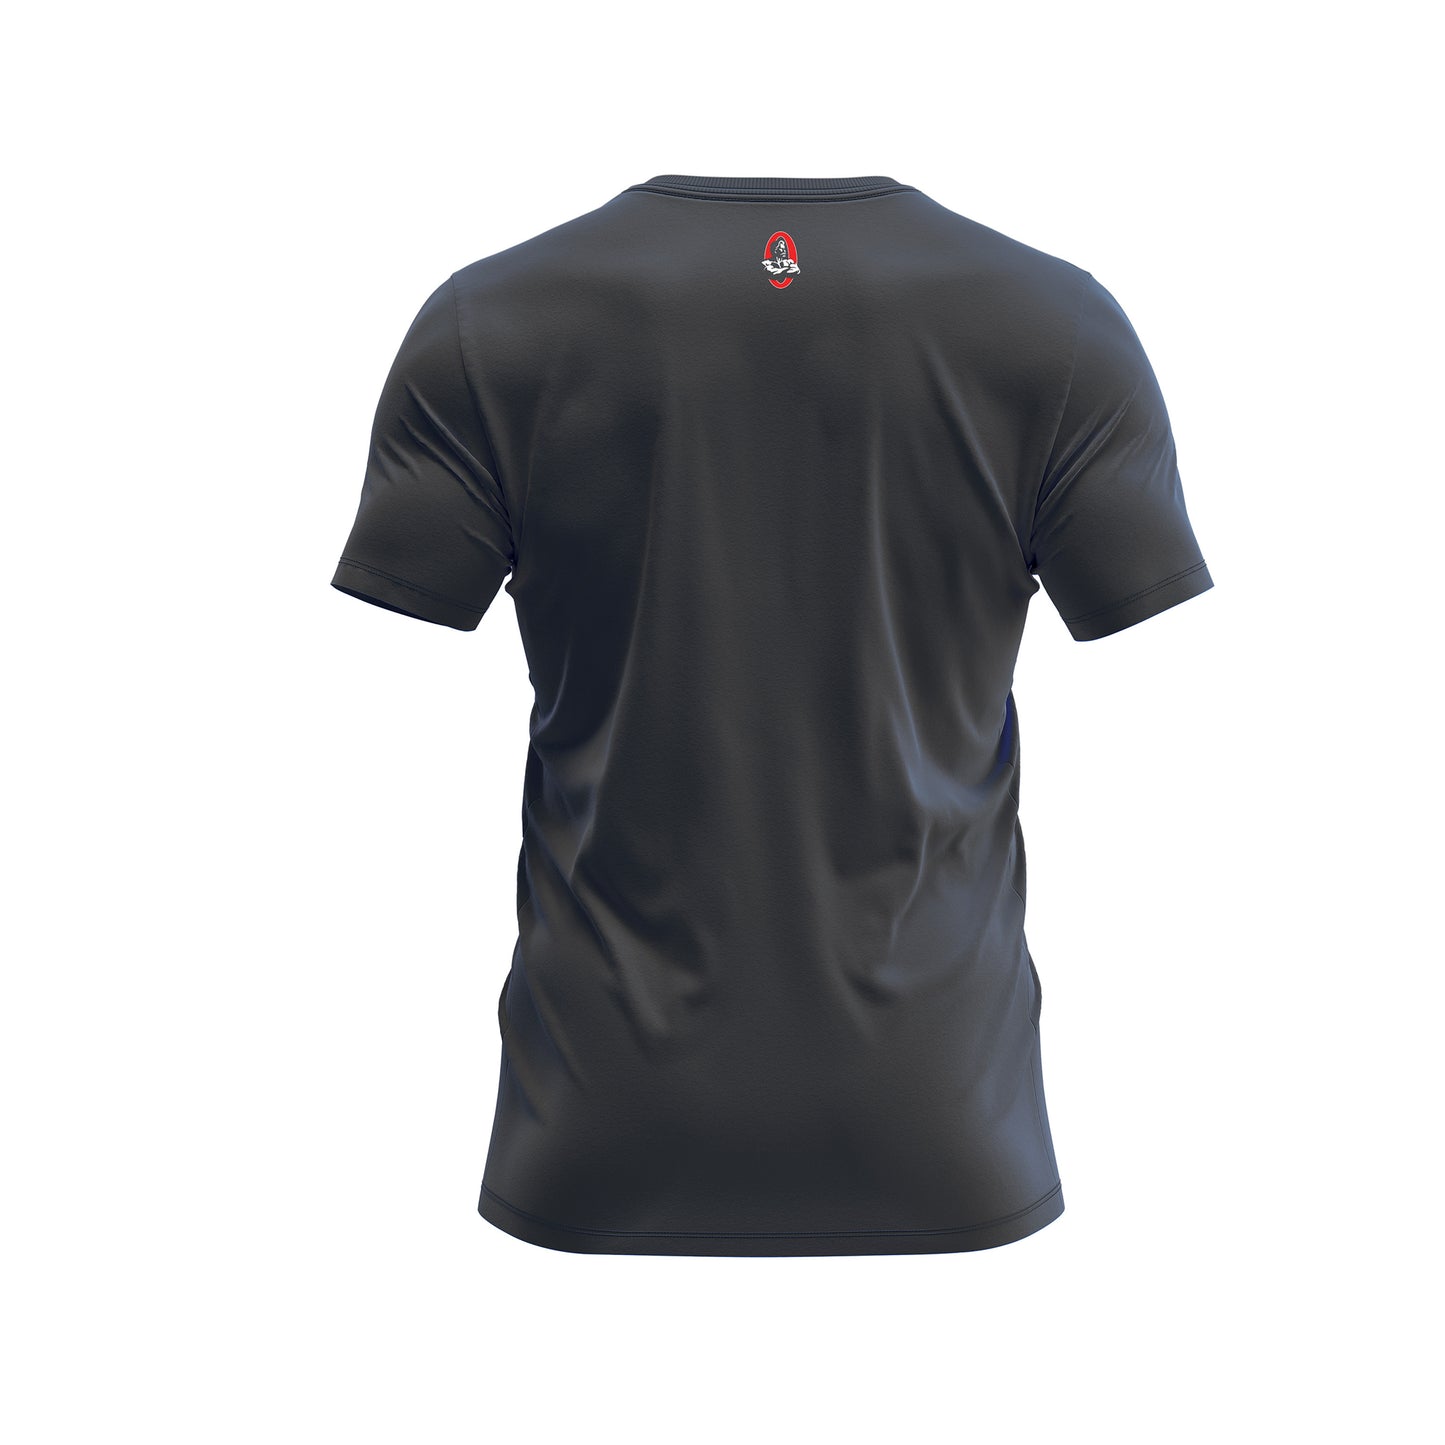 Olympia Black T-Shirt with Weight Plate graphics